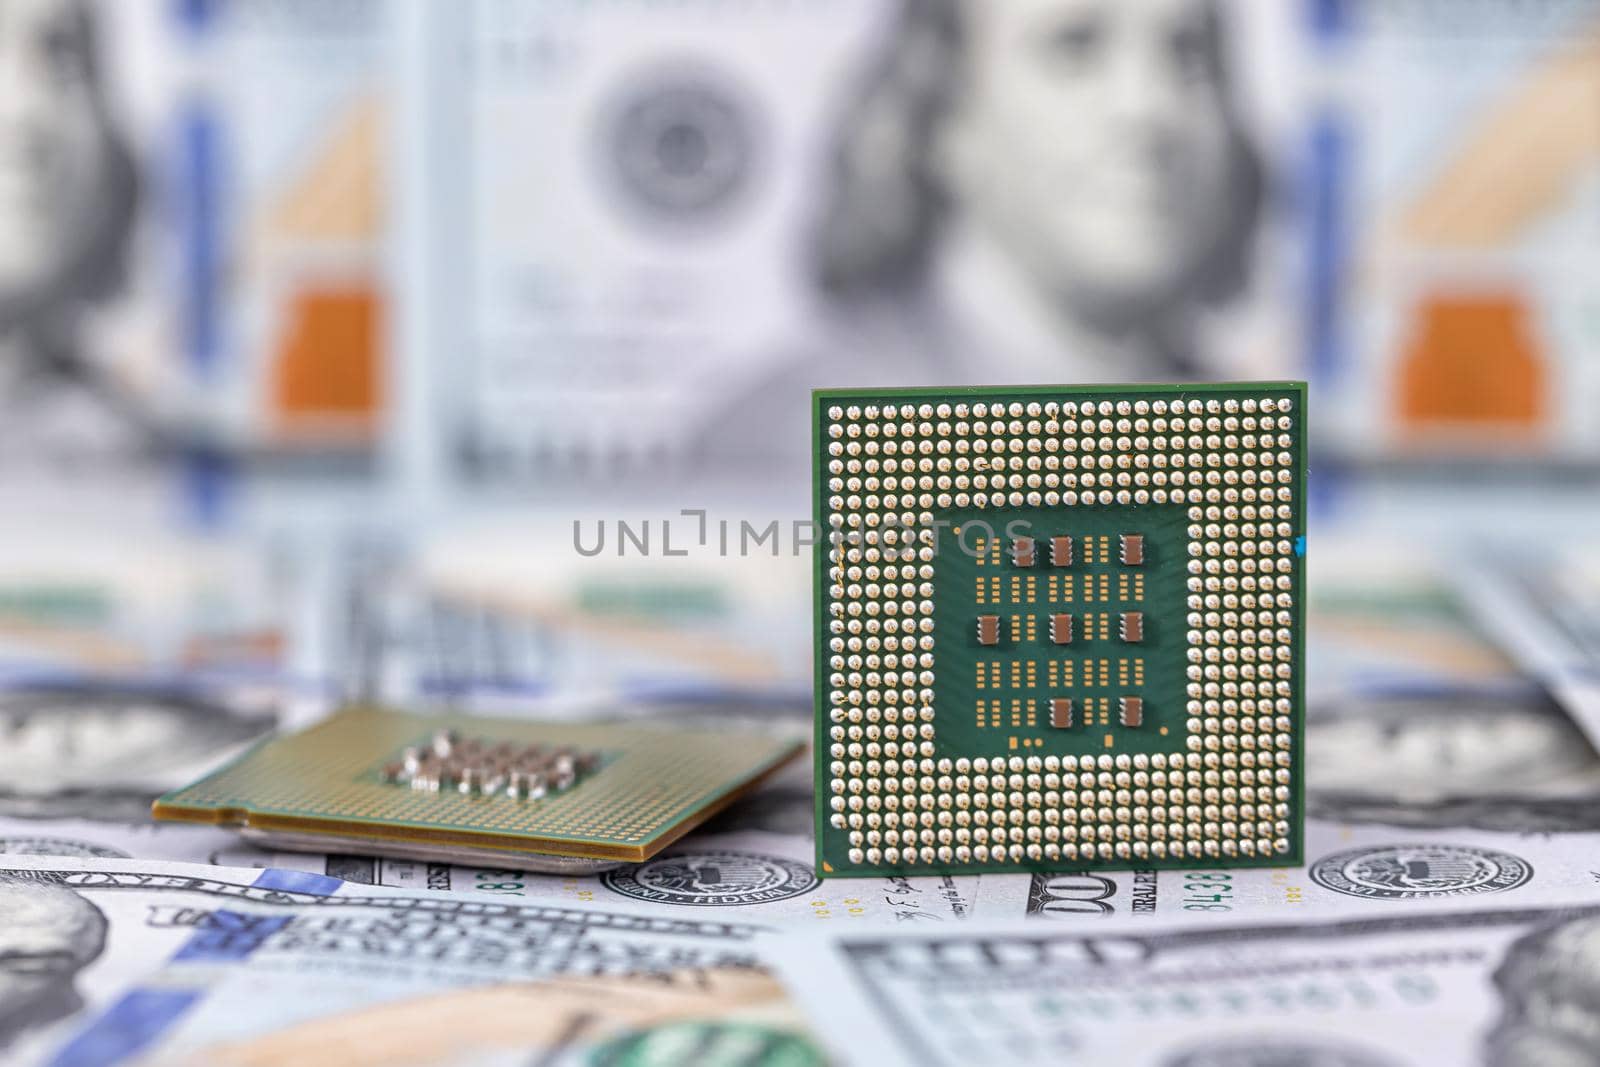 Two old computer processors lie in a pile of hundred-dollar bills